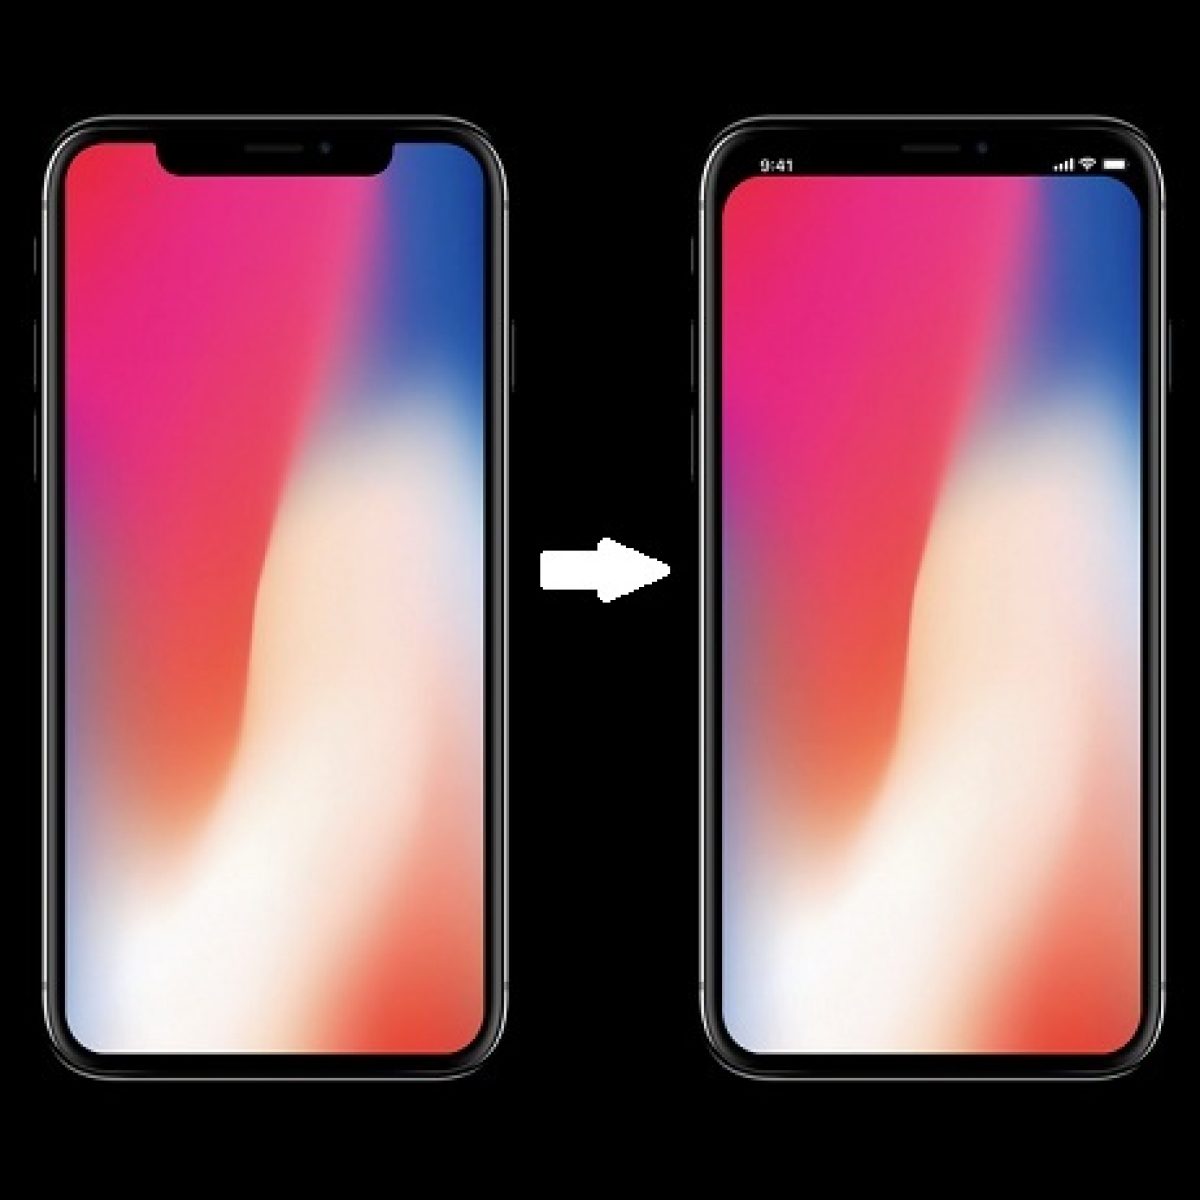 Trick To Remove The iPhone X Notch From Home And Lock Screen